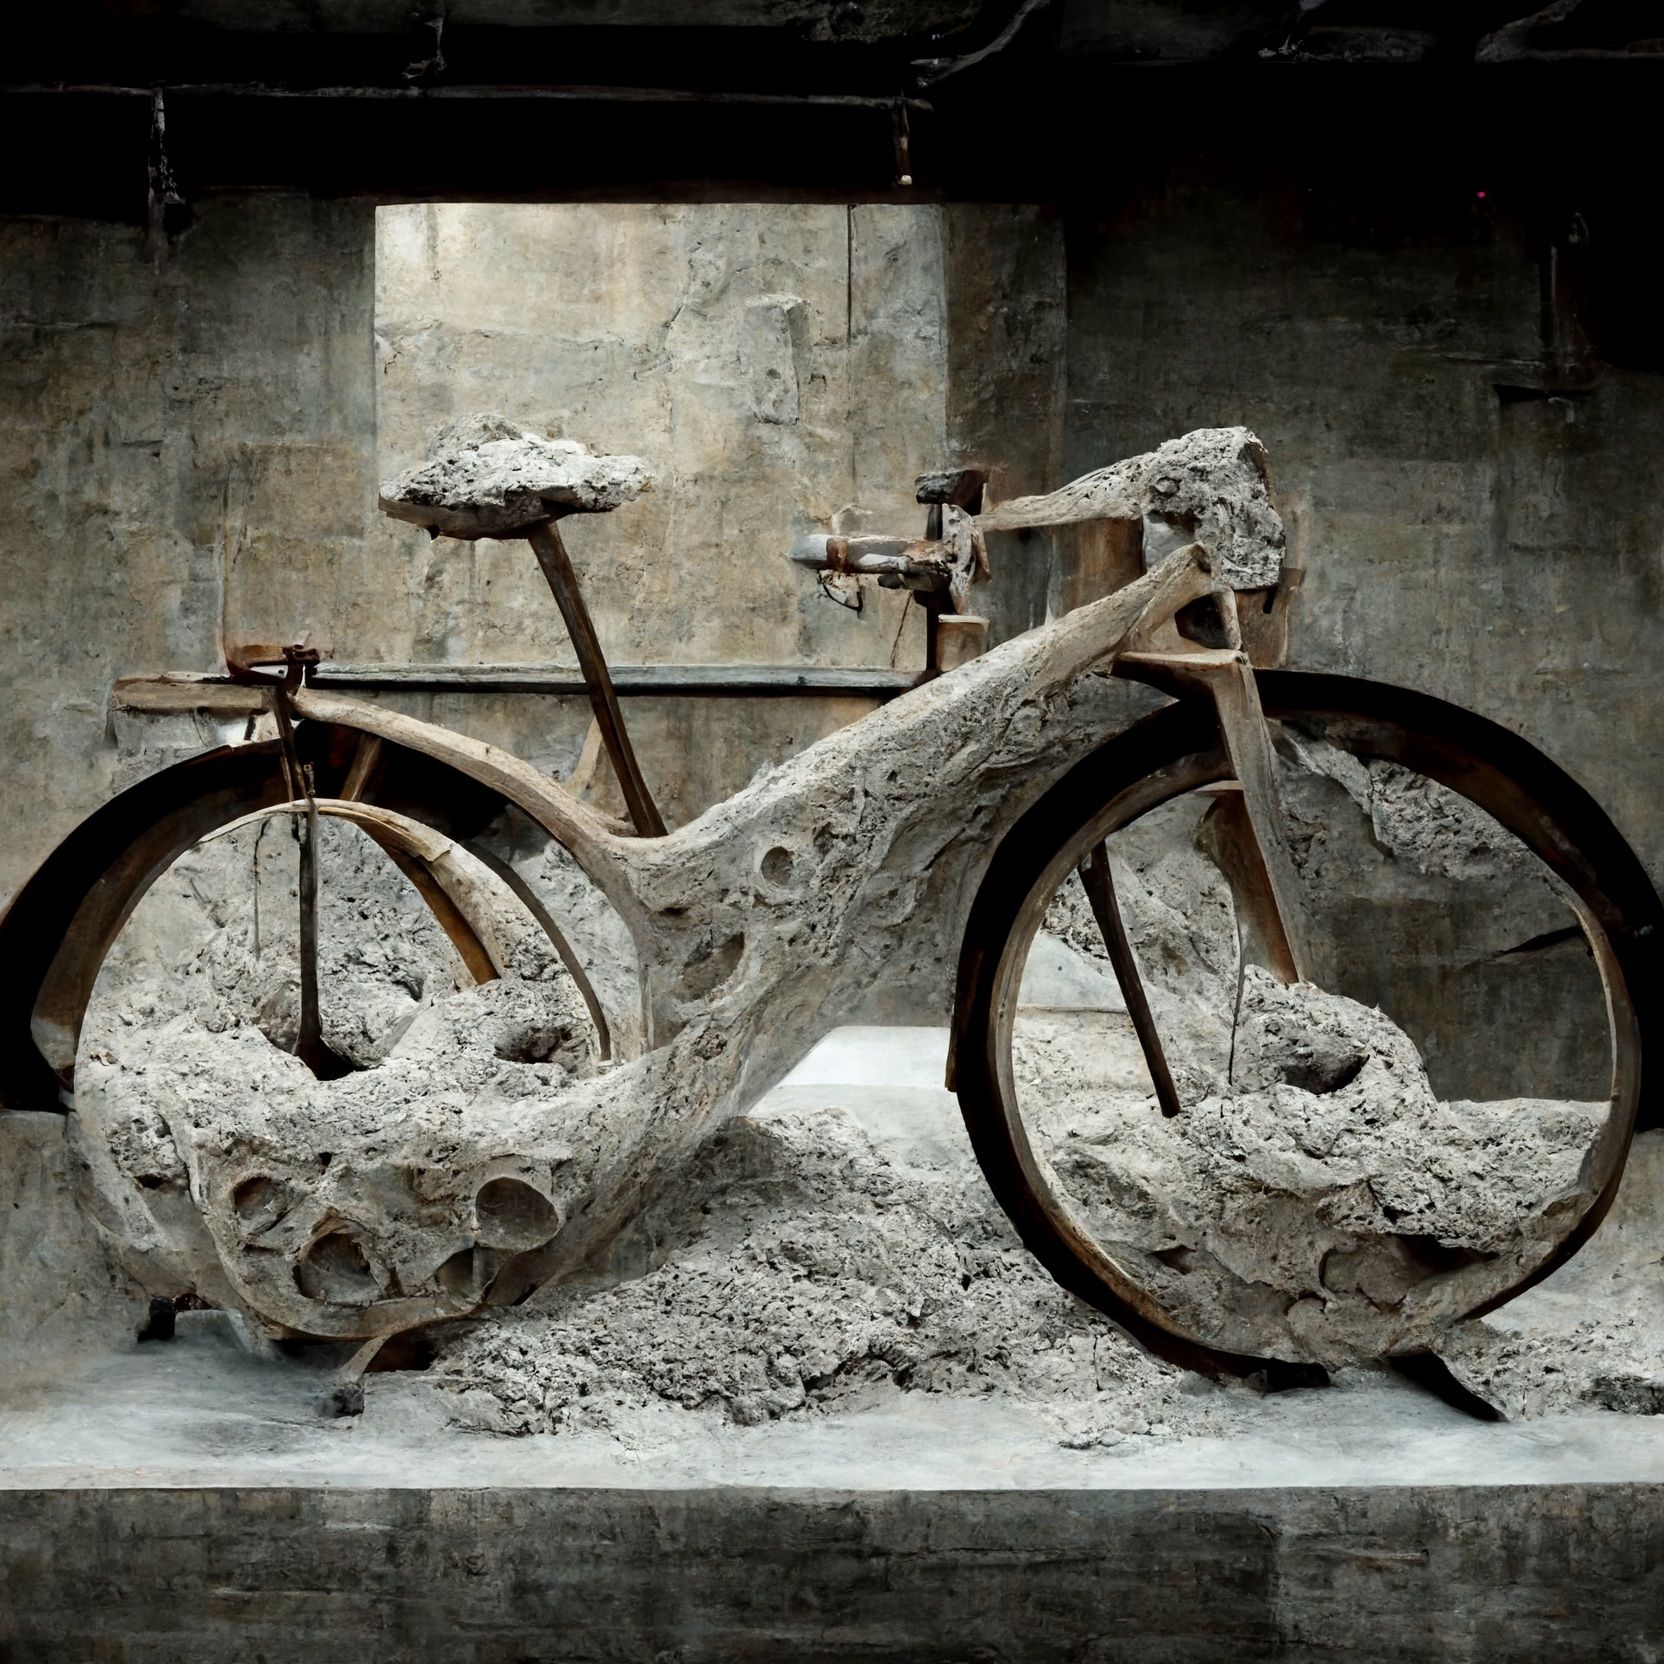 A Bicycle made out of concrete